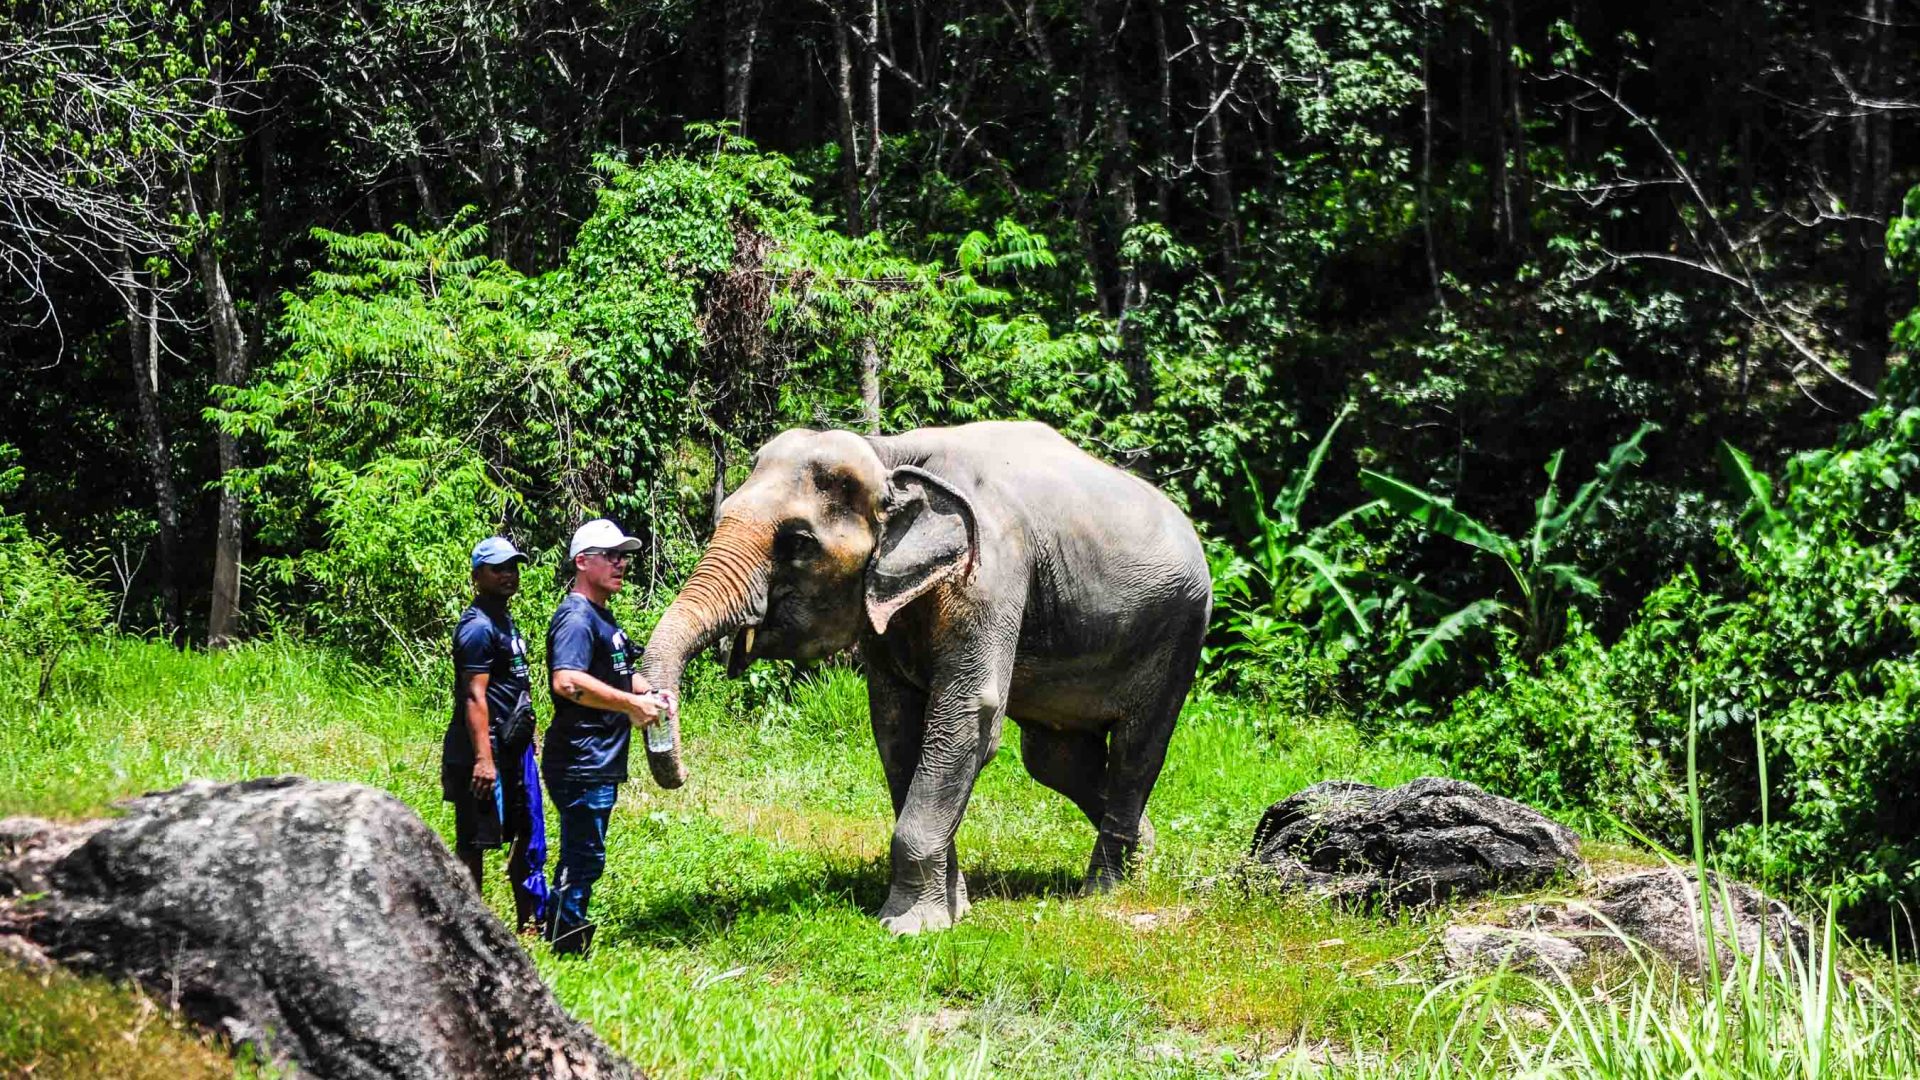 Two men stand with an elephant in green surrounds.